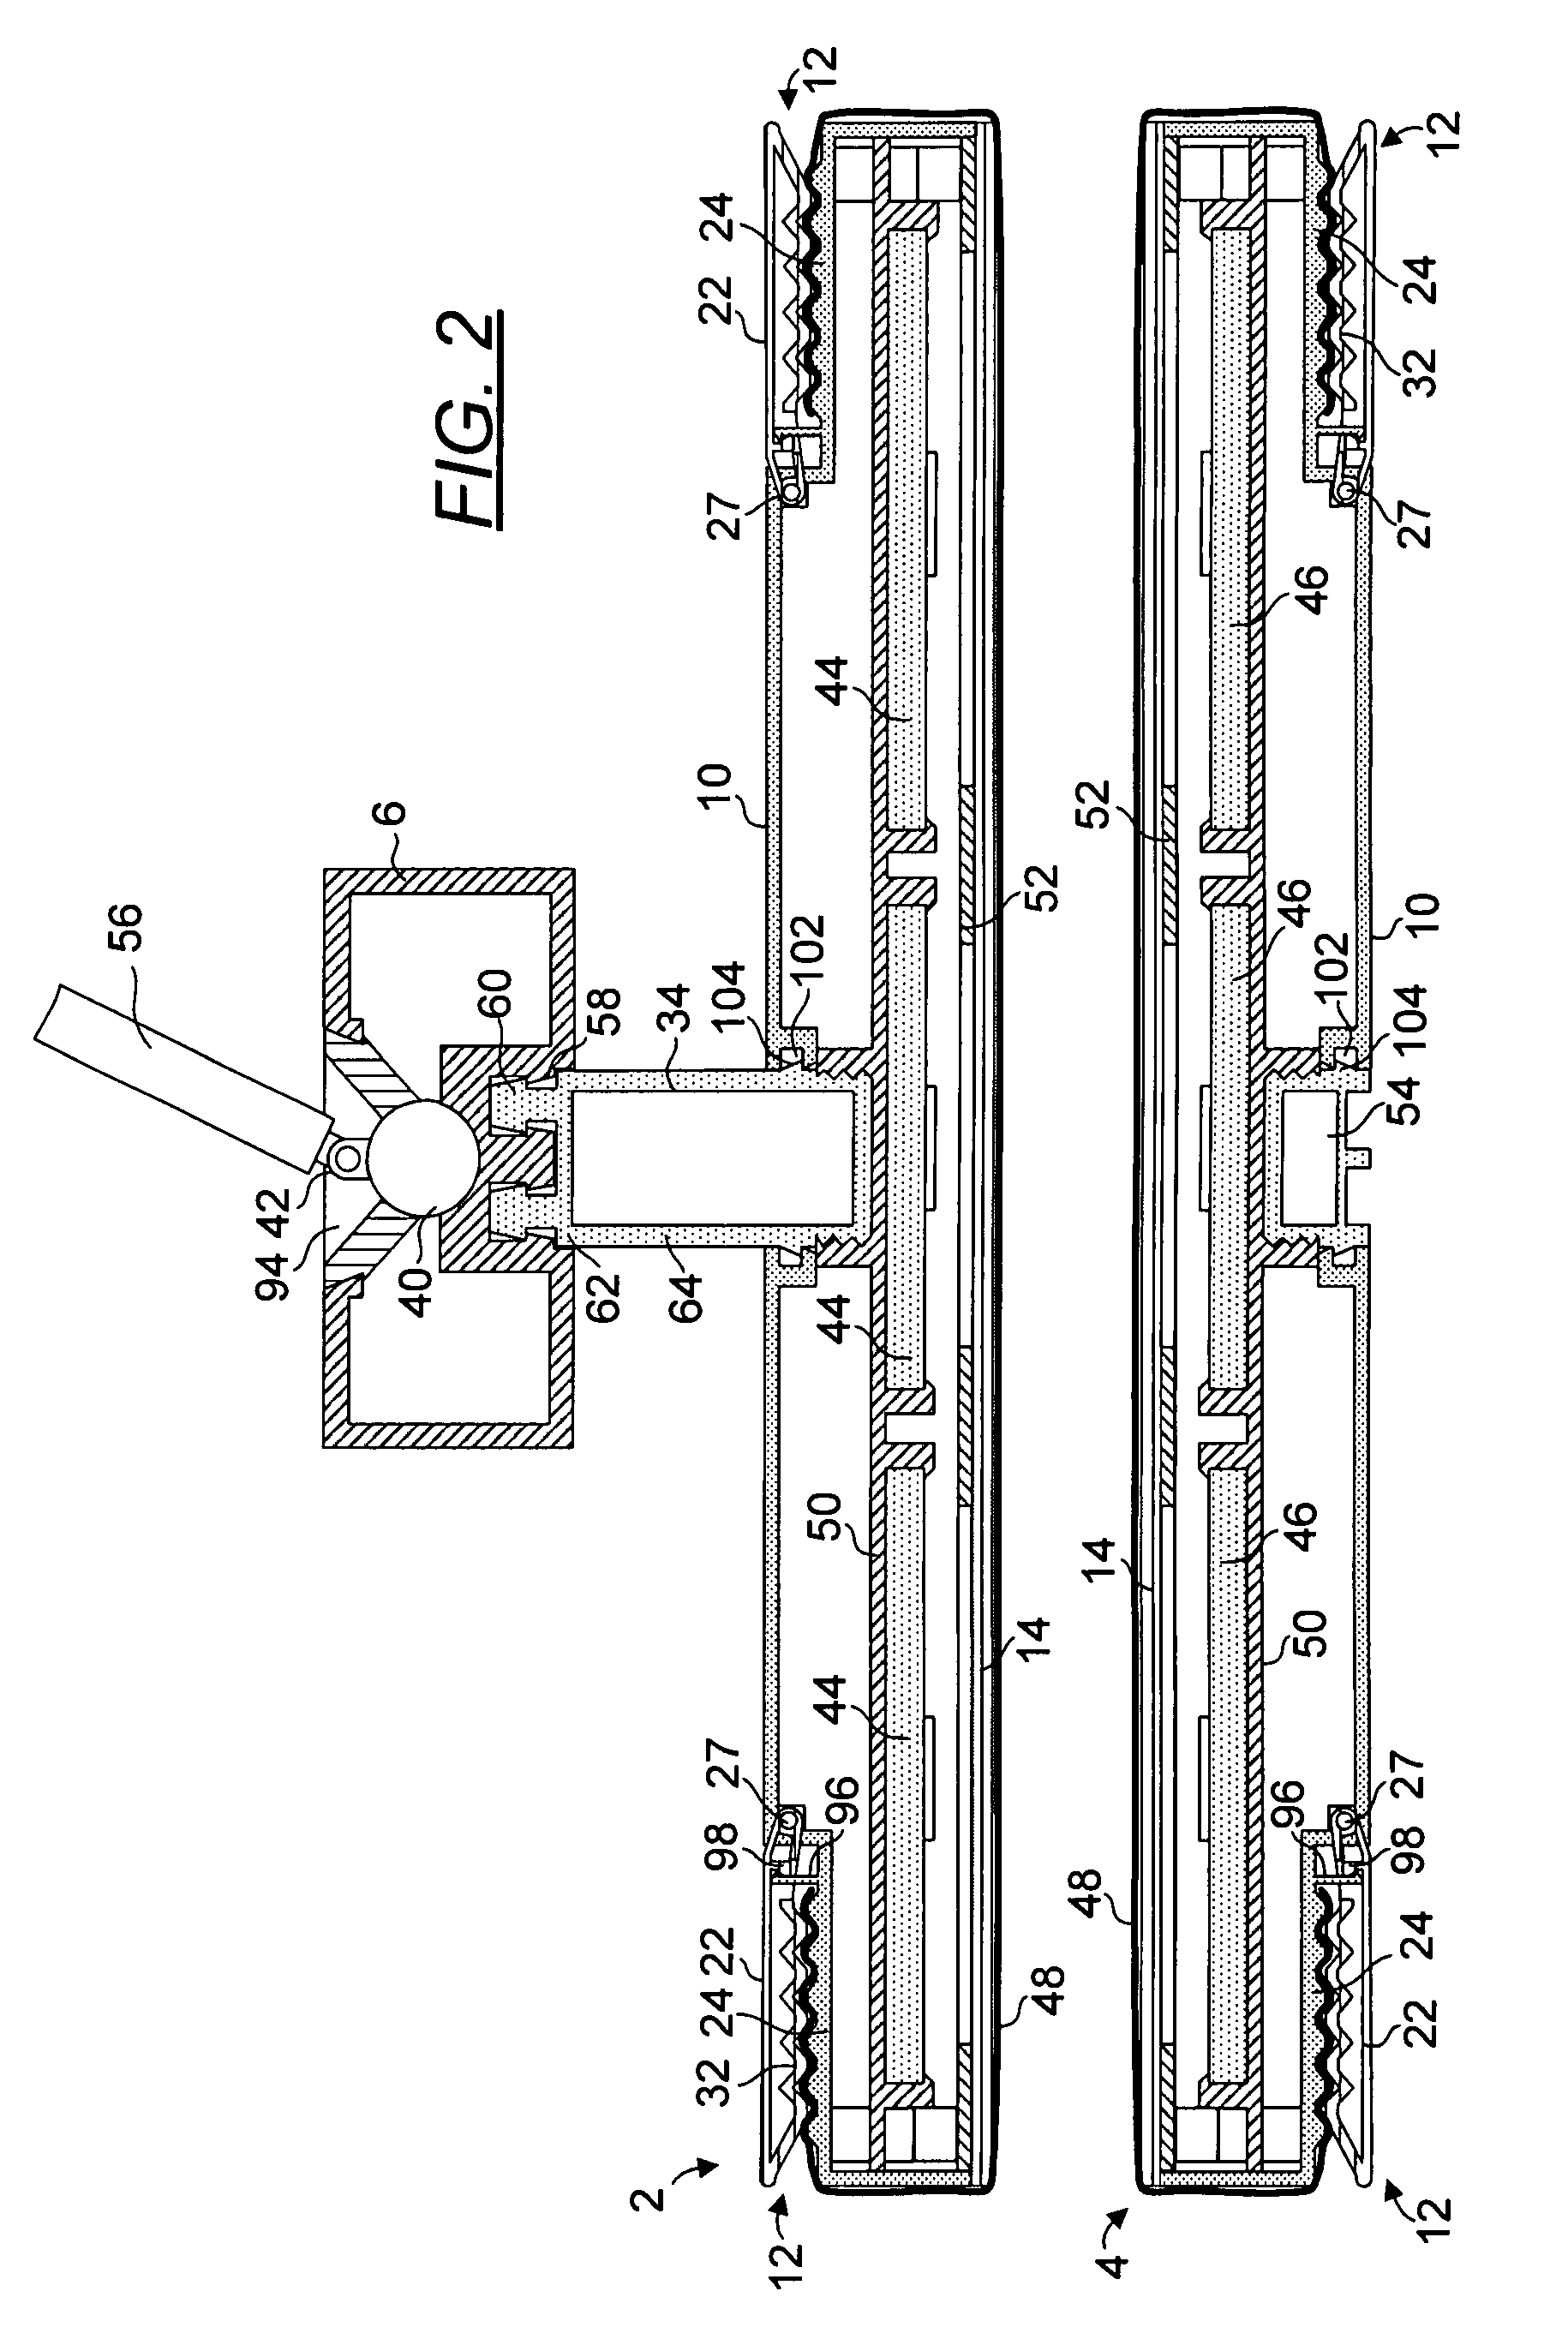 Variable strength magnetic window cleaning device